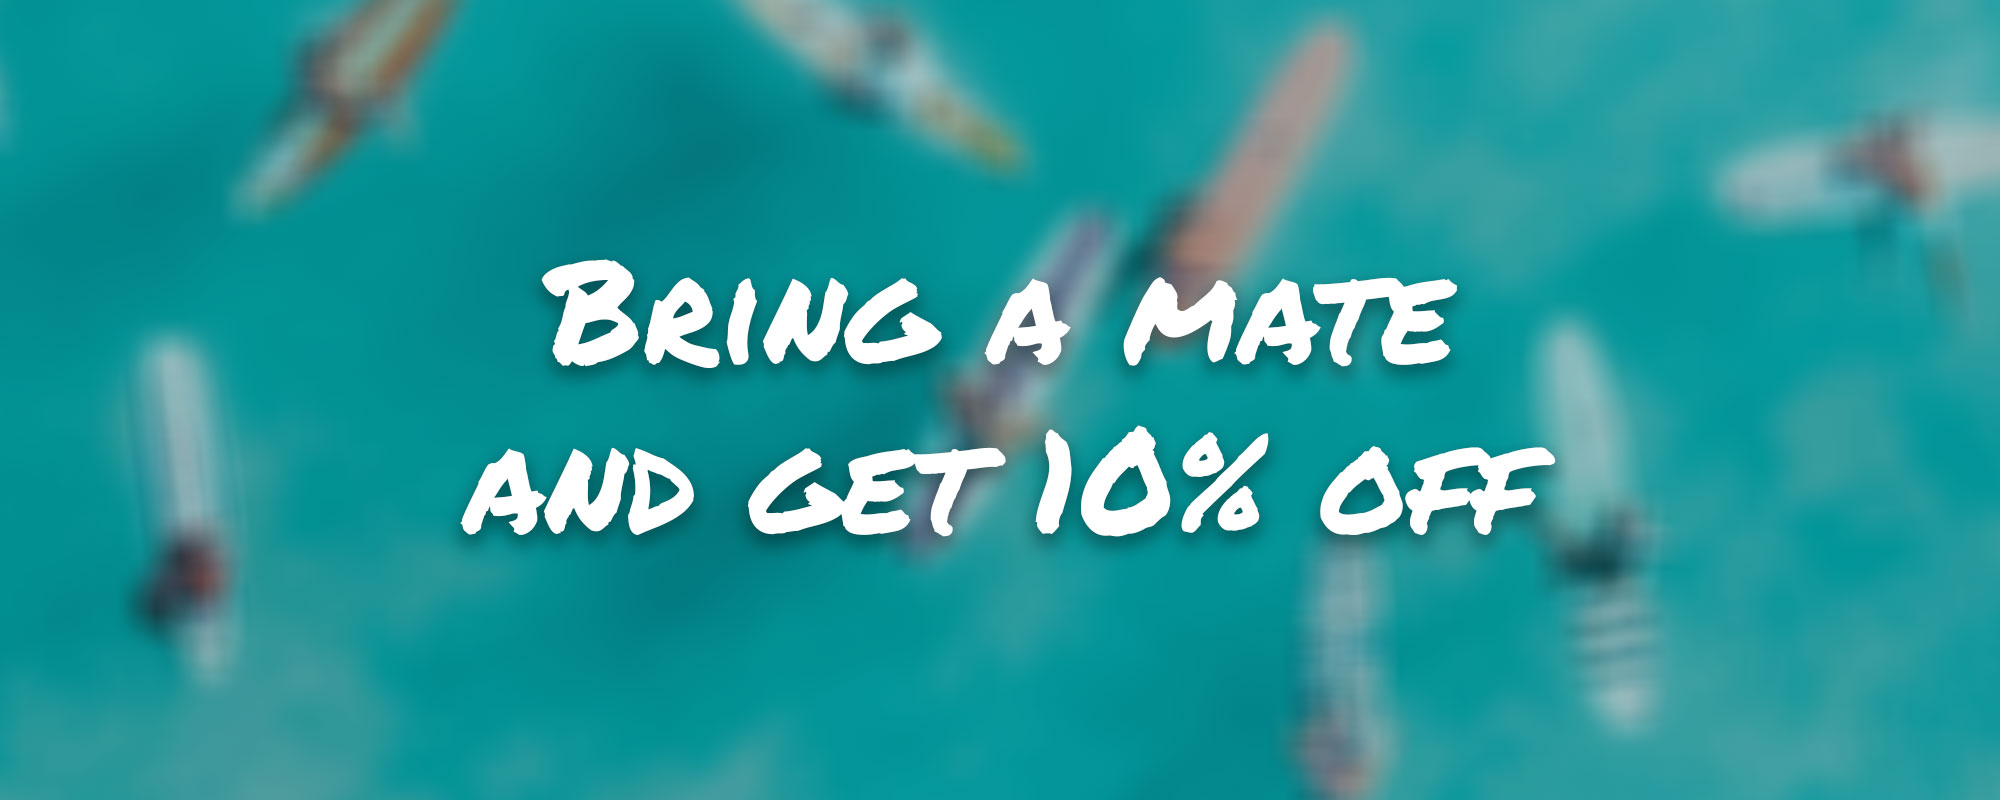 bring a mate and get 10% off